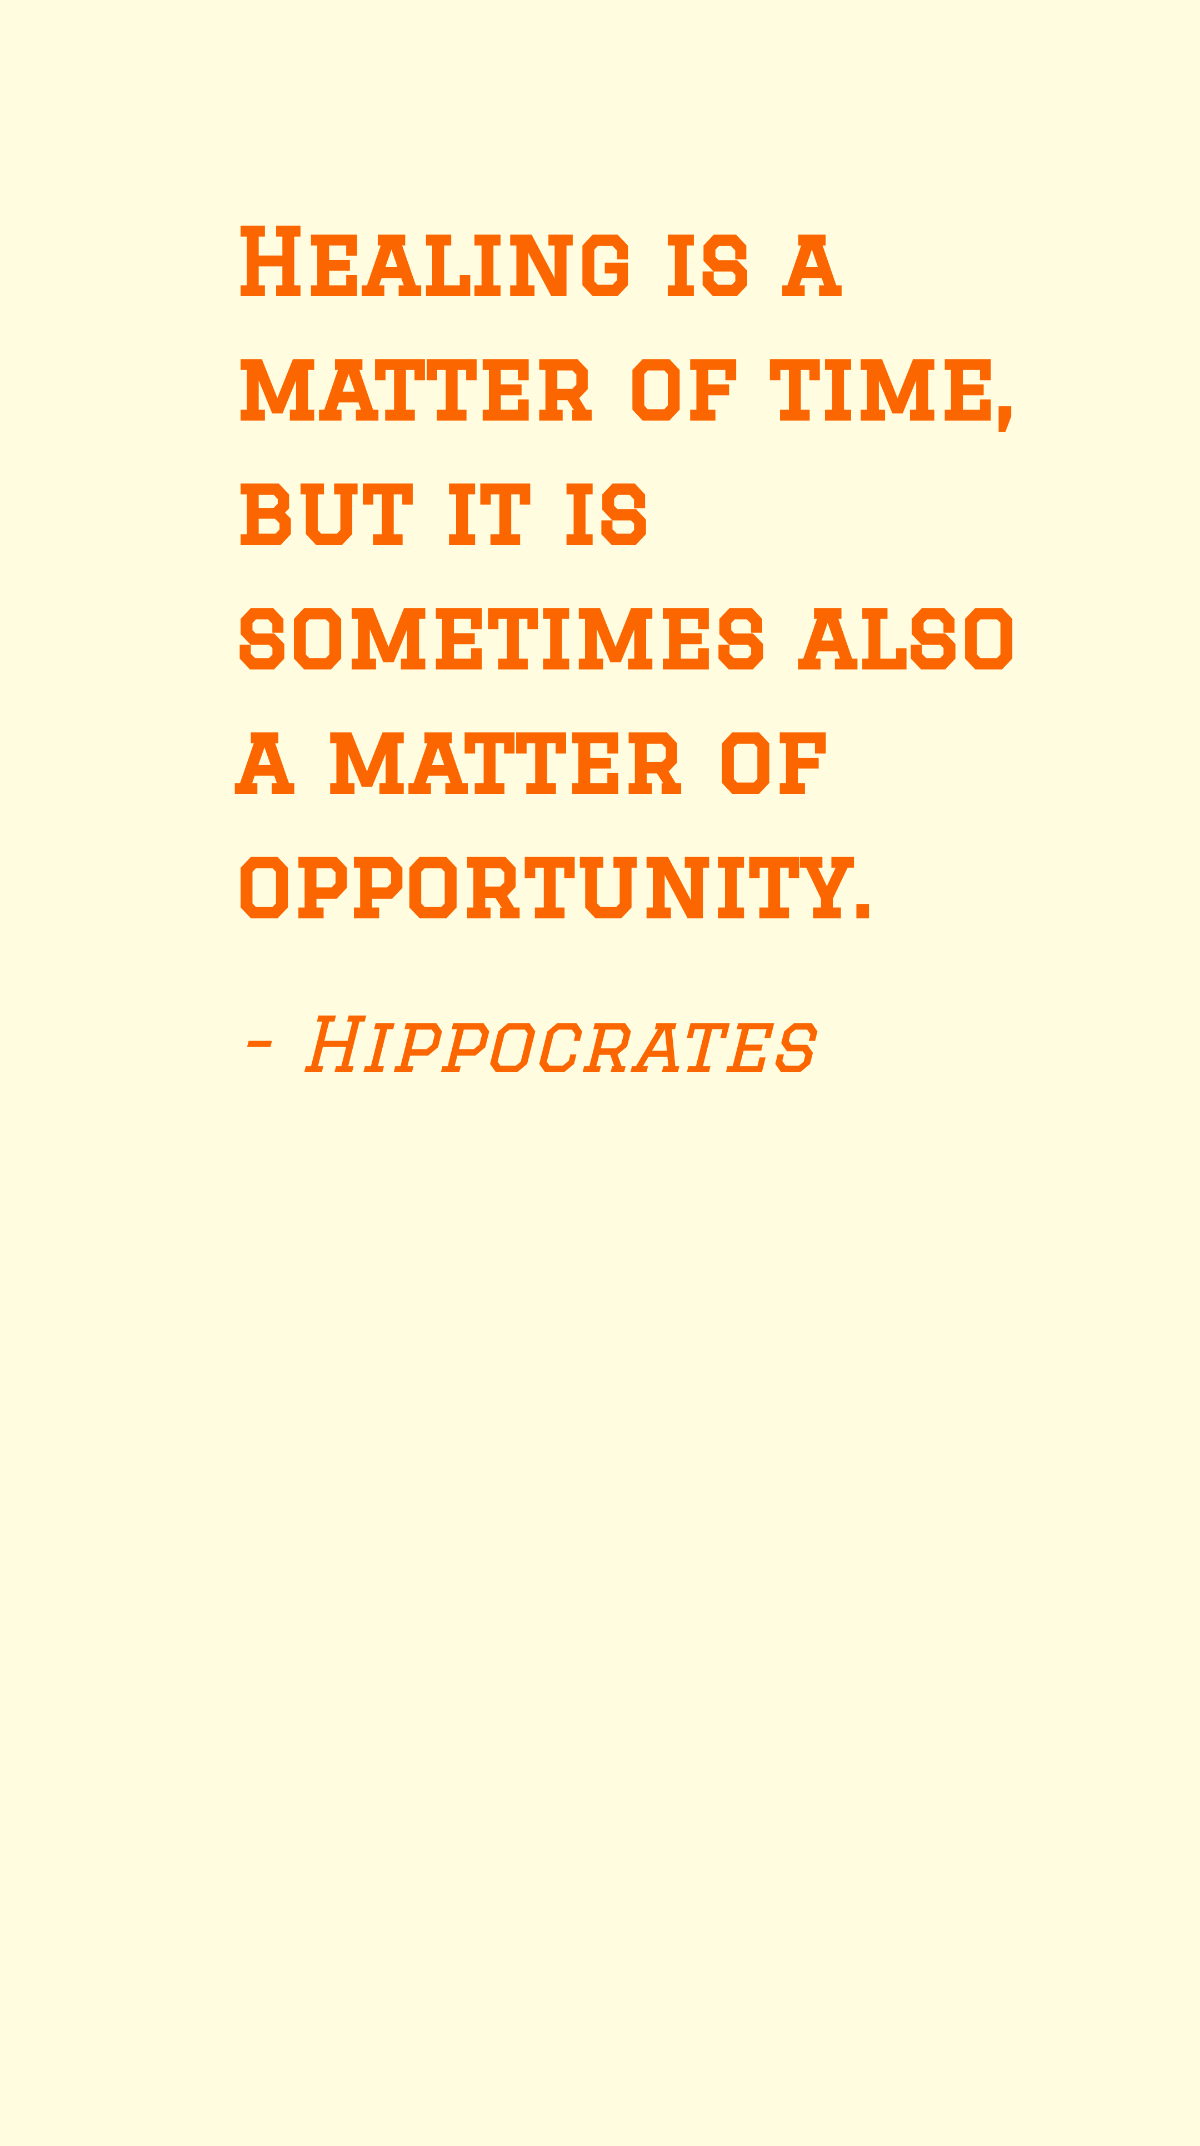 Free Hippocrates - Healing is a matter of time, but it is sometimes also a matter of opportunity. Template